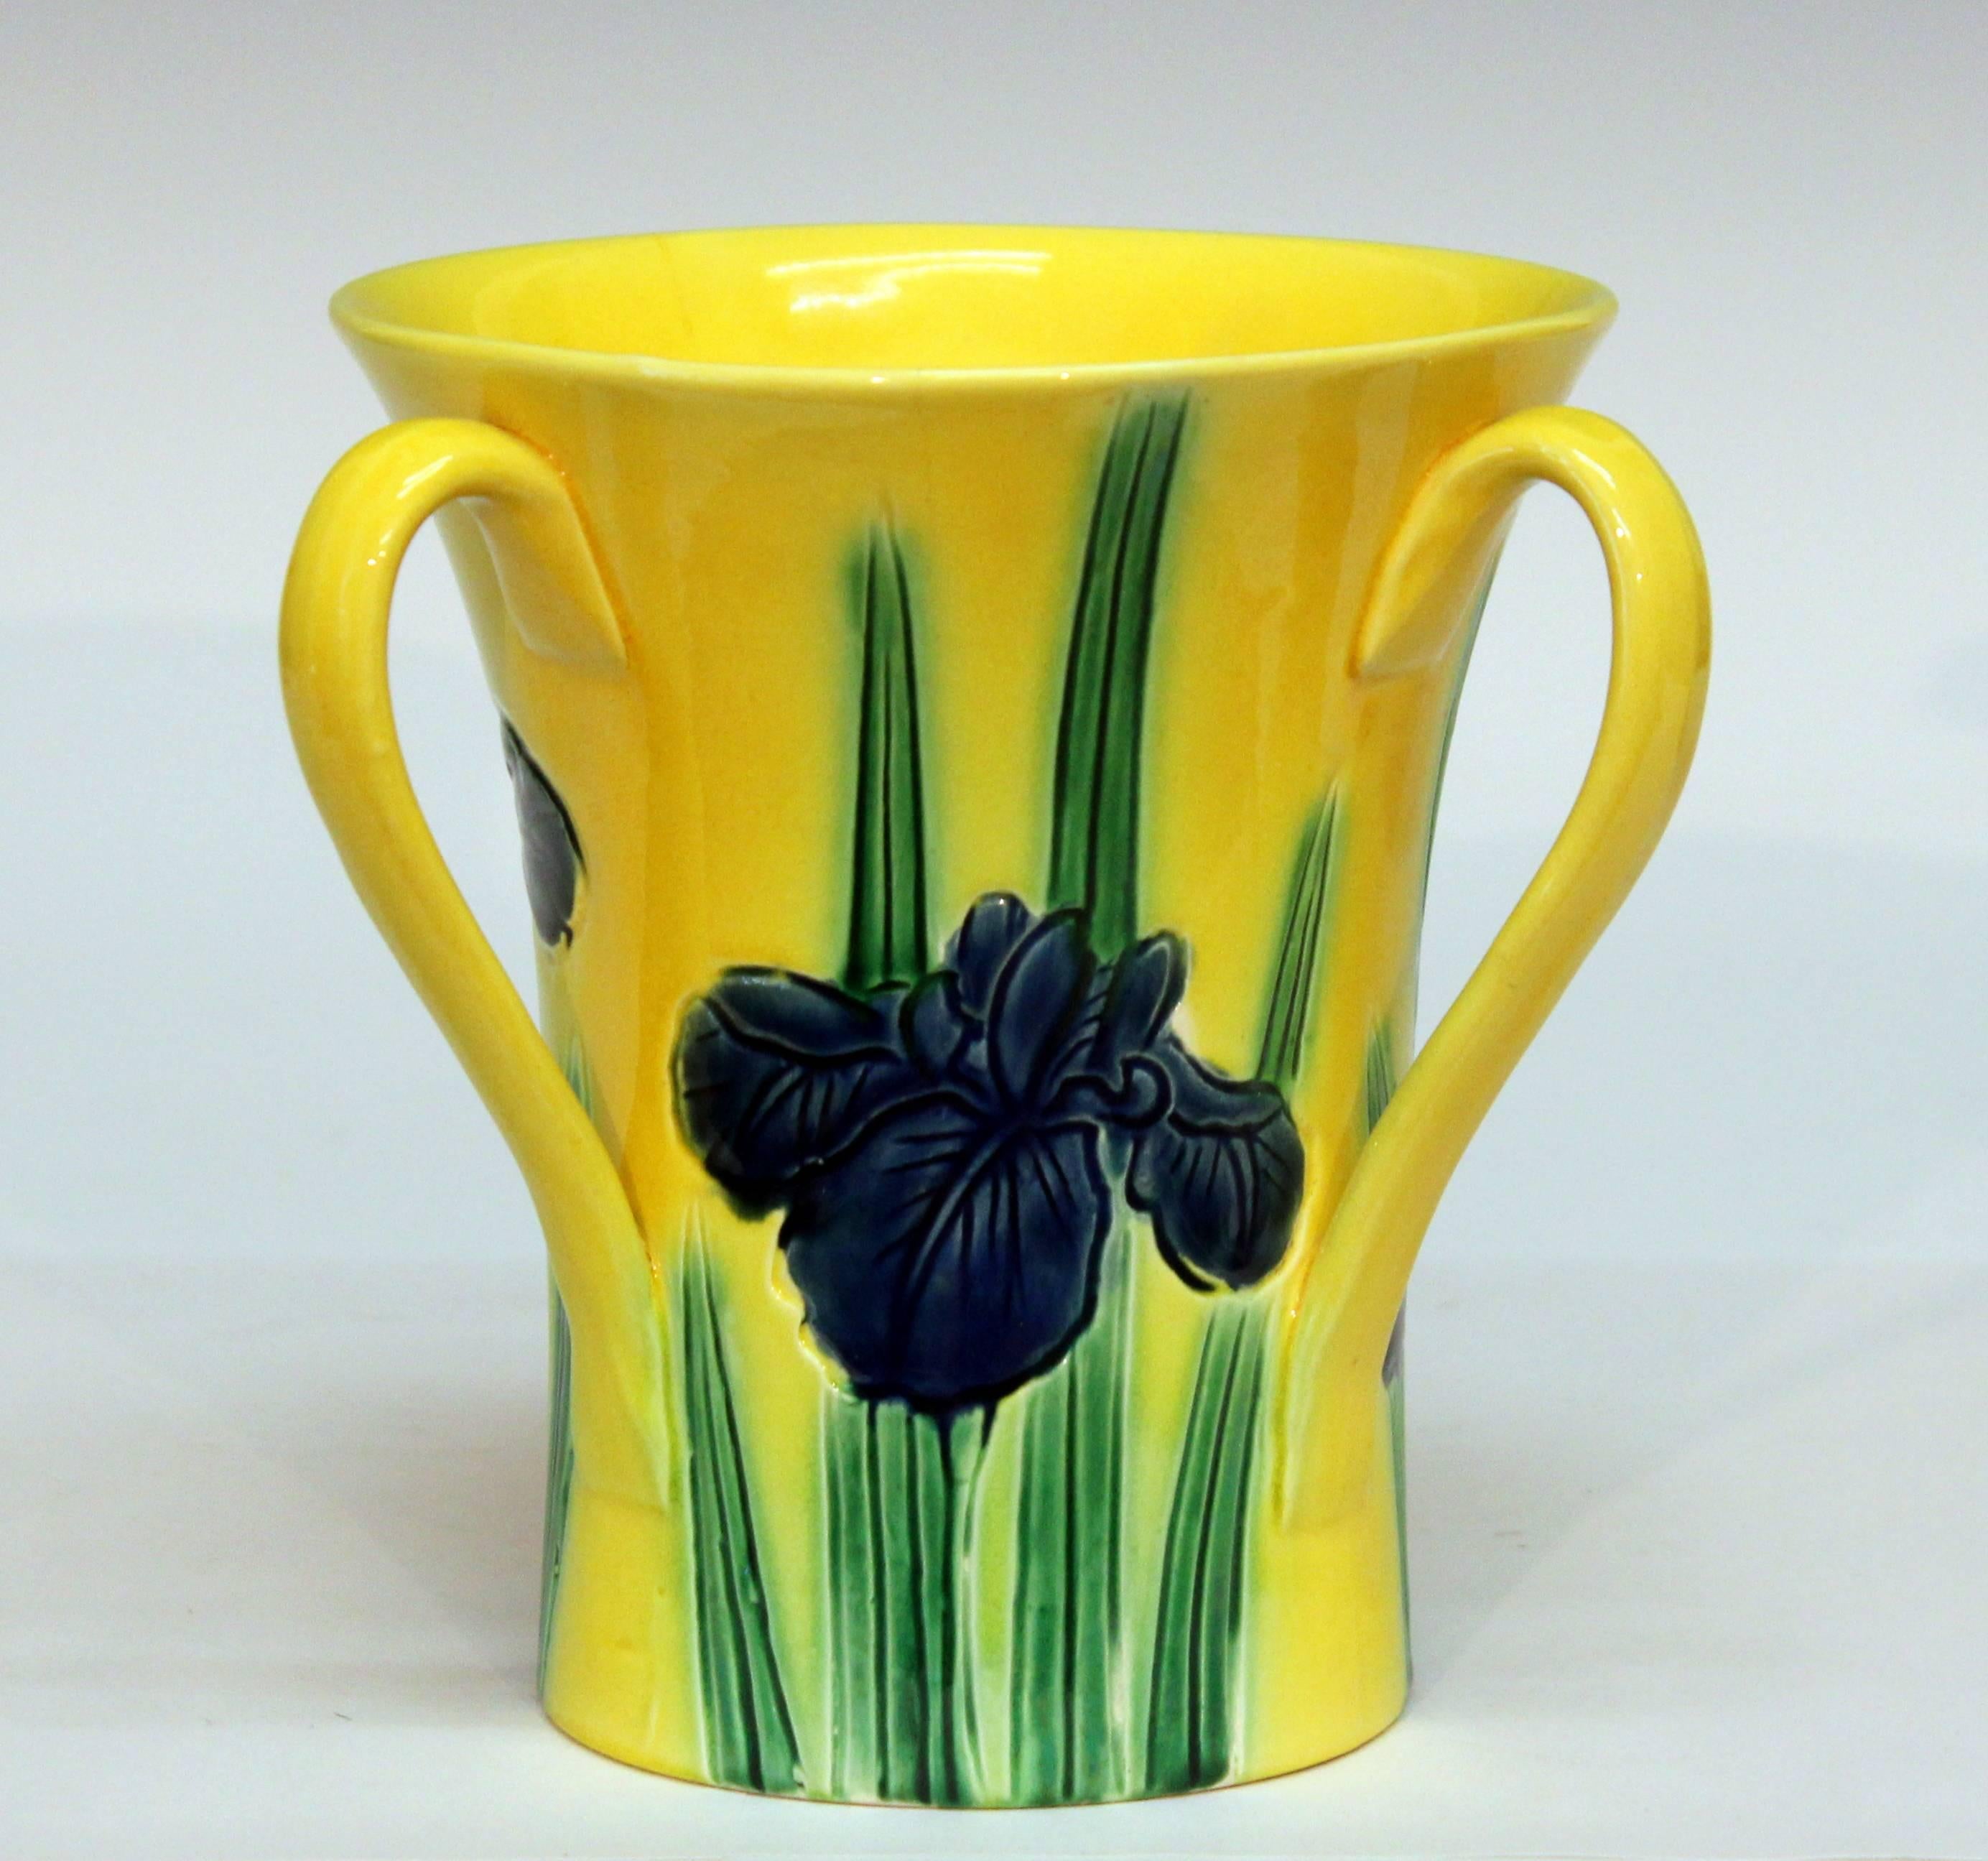 Antique Awaji Pottery vase with three handles, finely potted and confidently decorated with incised irises against a striking bright yellow ground, circa 1900. 6